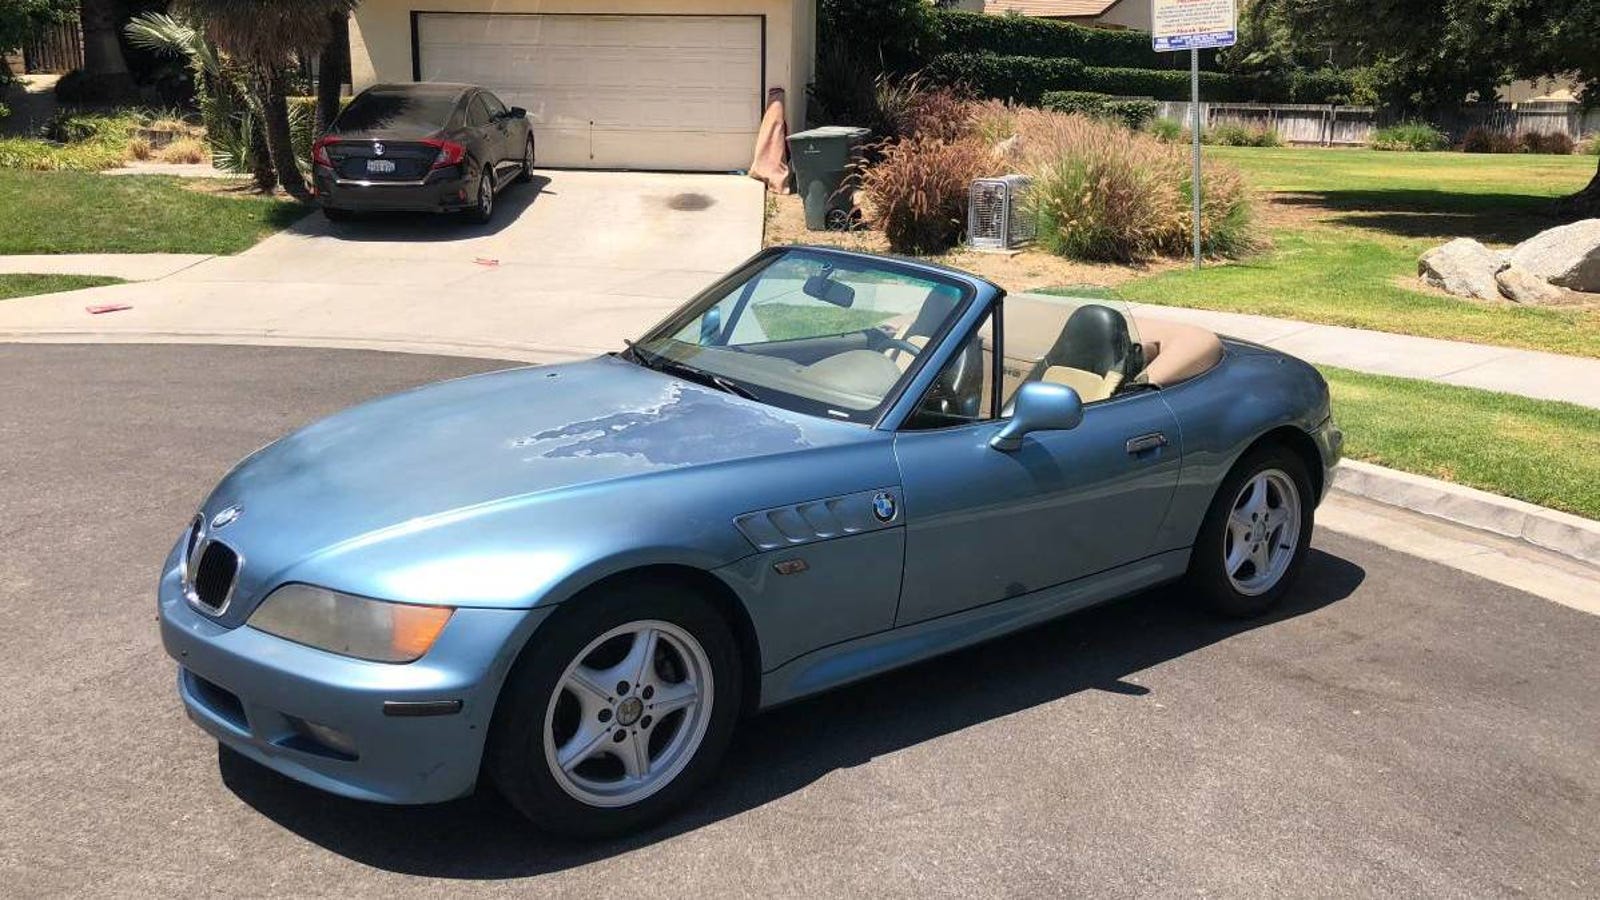 At 2,100, Could This 1997 BMW Z3’s Price Outweigh Its